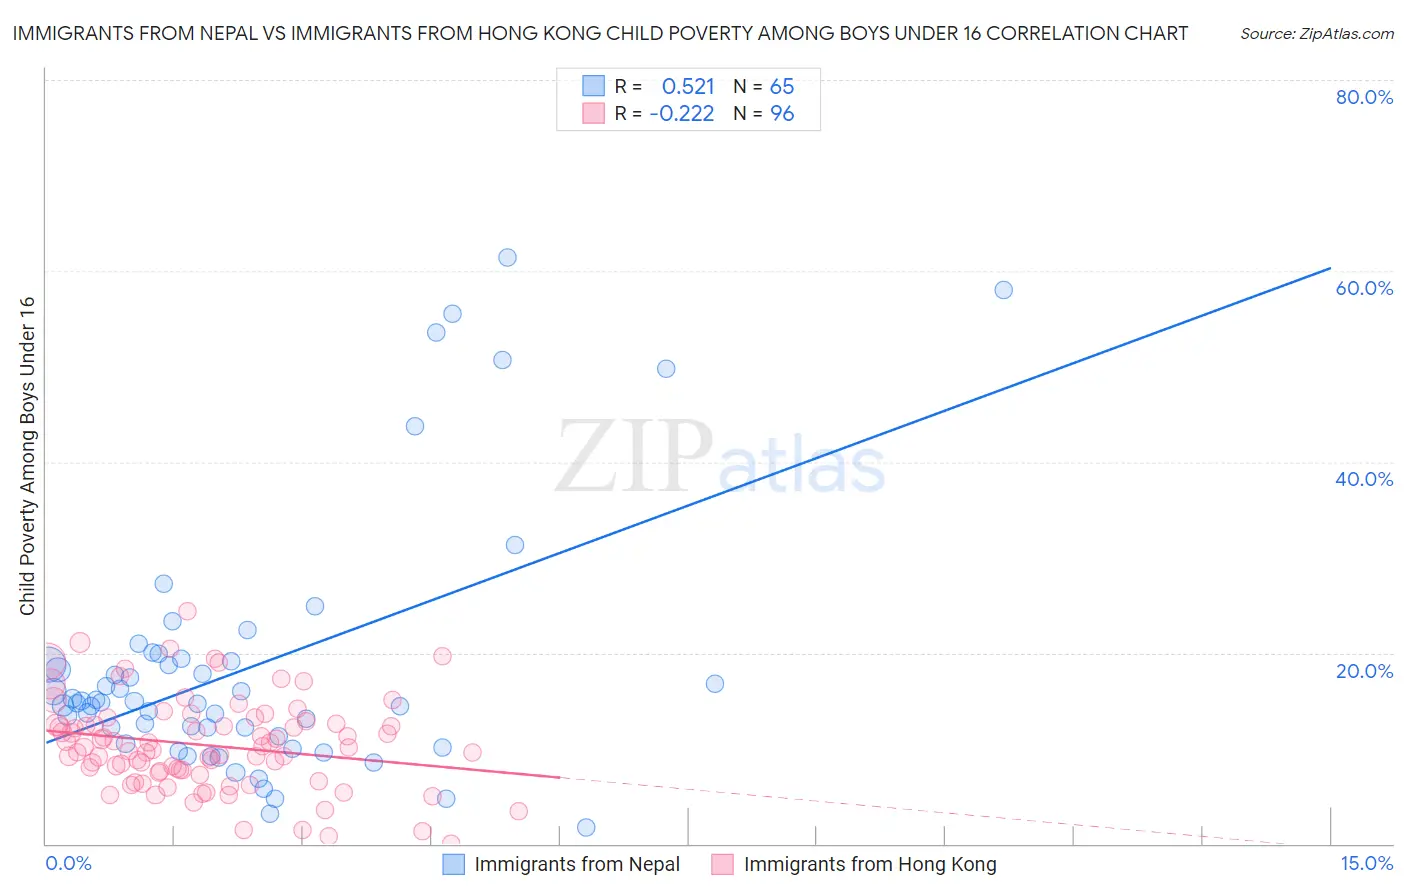 Immigrants from Nepal vs Immigrants from Hong Kong Child Poverty Among Boys Under 16